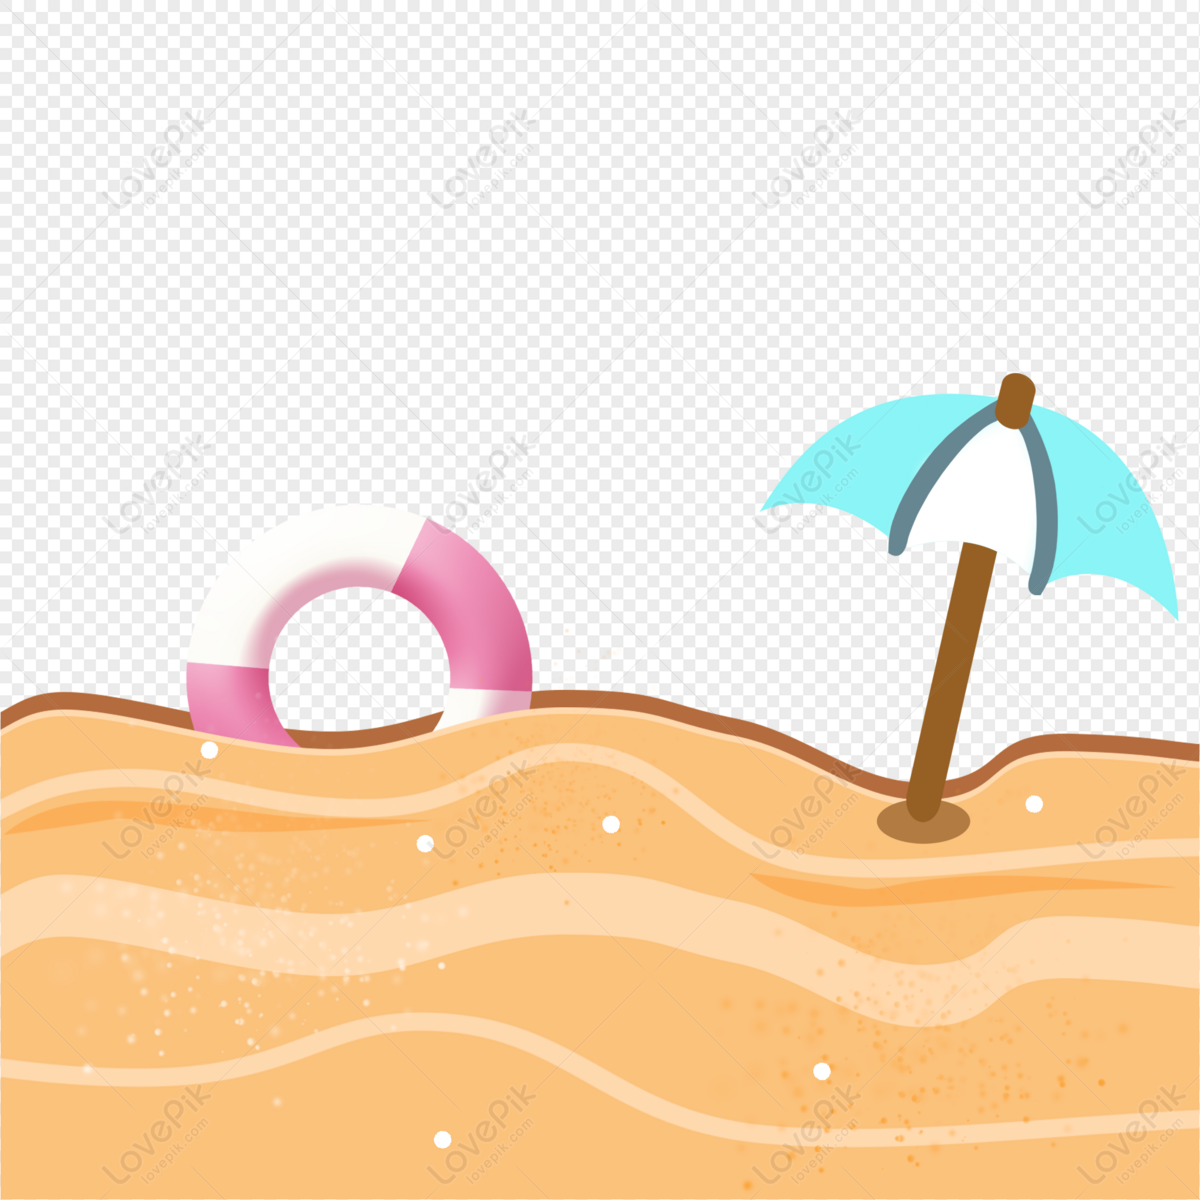 Cute Cartoon Hand Painted Beach PNG Image And Clipart Image For Free  Download - Lovepik | 401098528